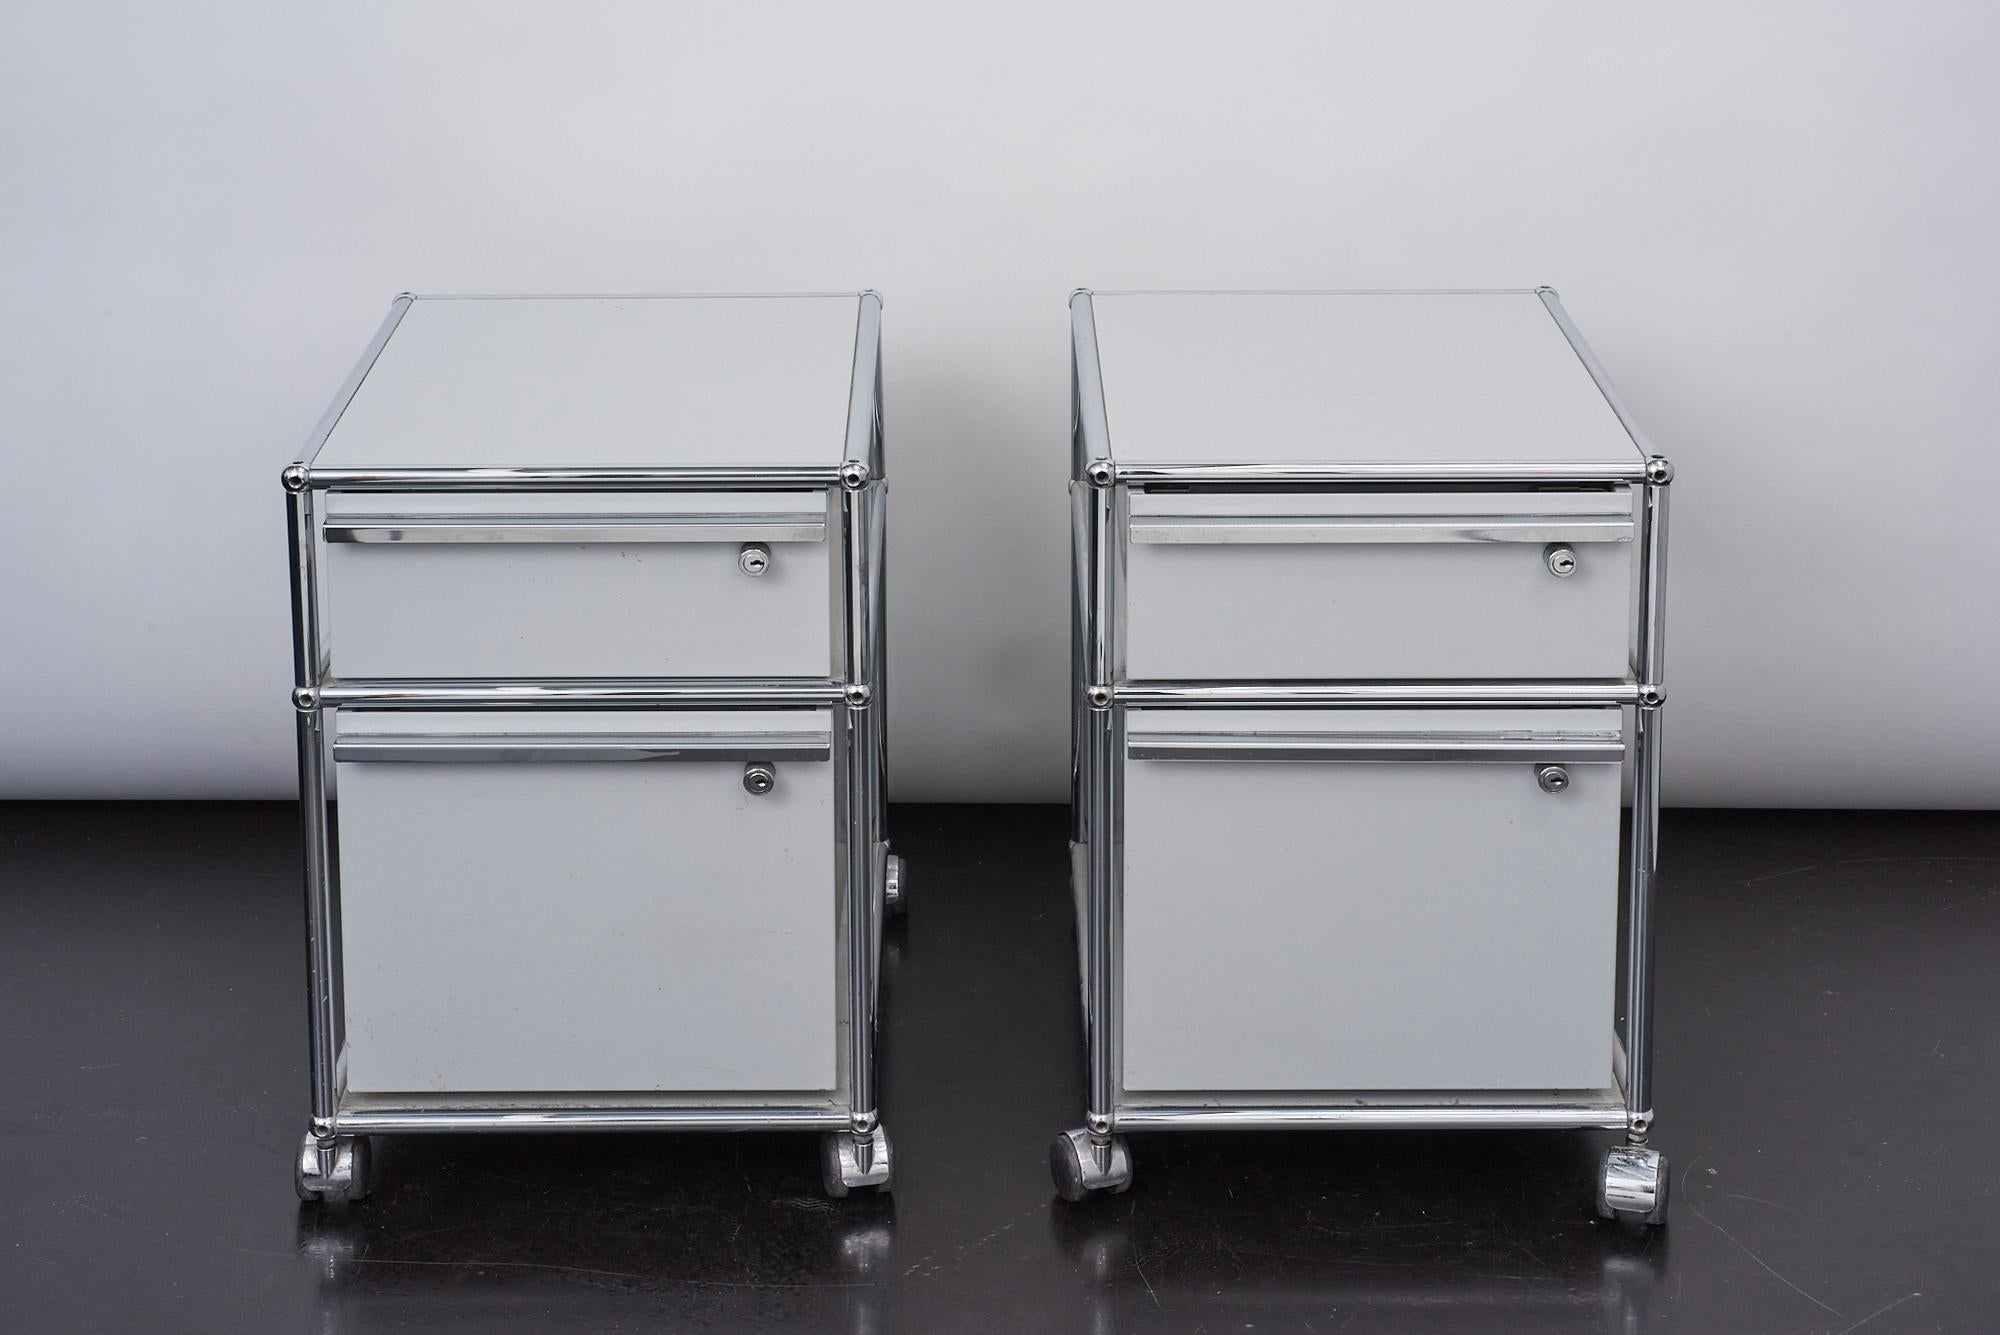 A pair of two USM Haller mobile pedestals with file cabinets by Fritz Haller & Paul Schärer.
USM takes its initials in 1885 from its founder, Ulrich Schärer, and Münsingen, the Swiss village where he was born.
Once the new USM factory was opened,